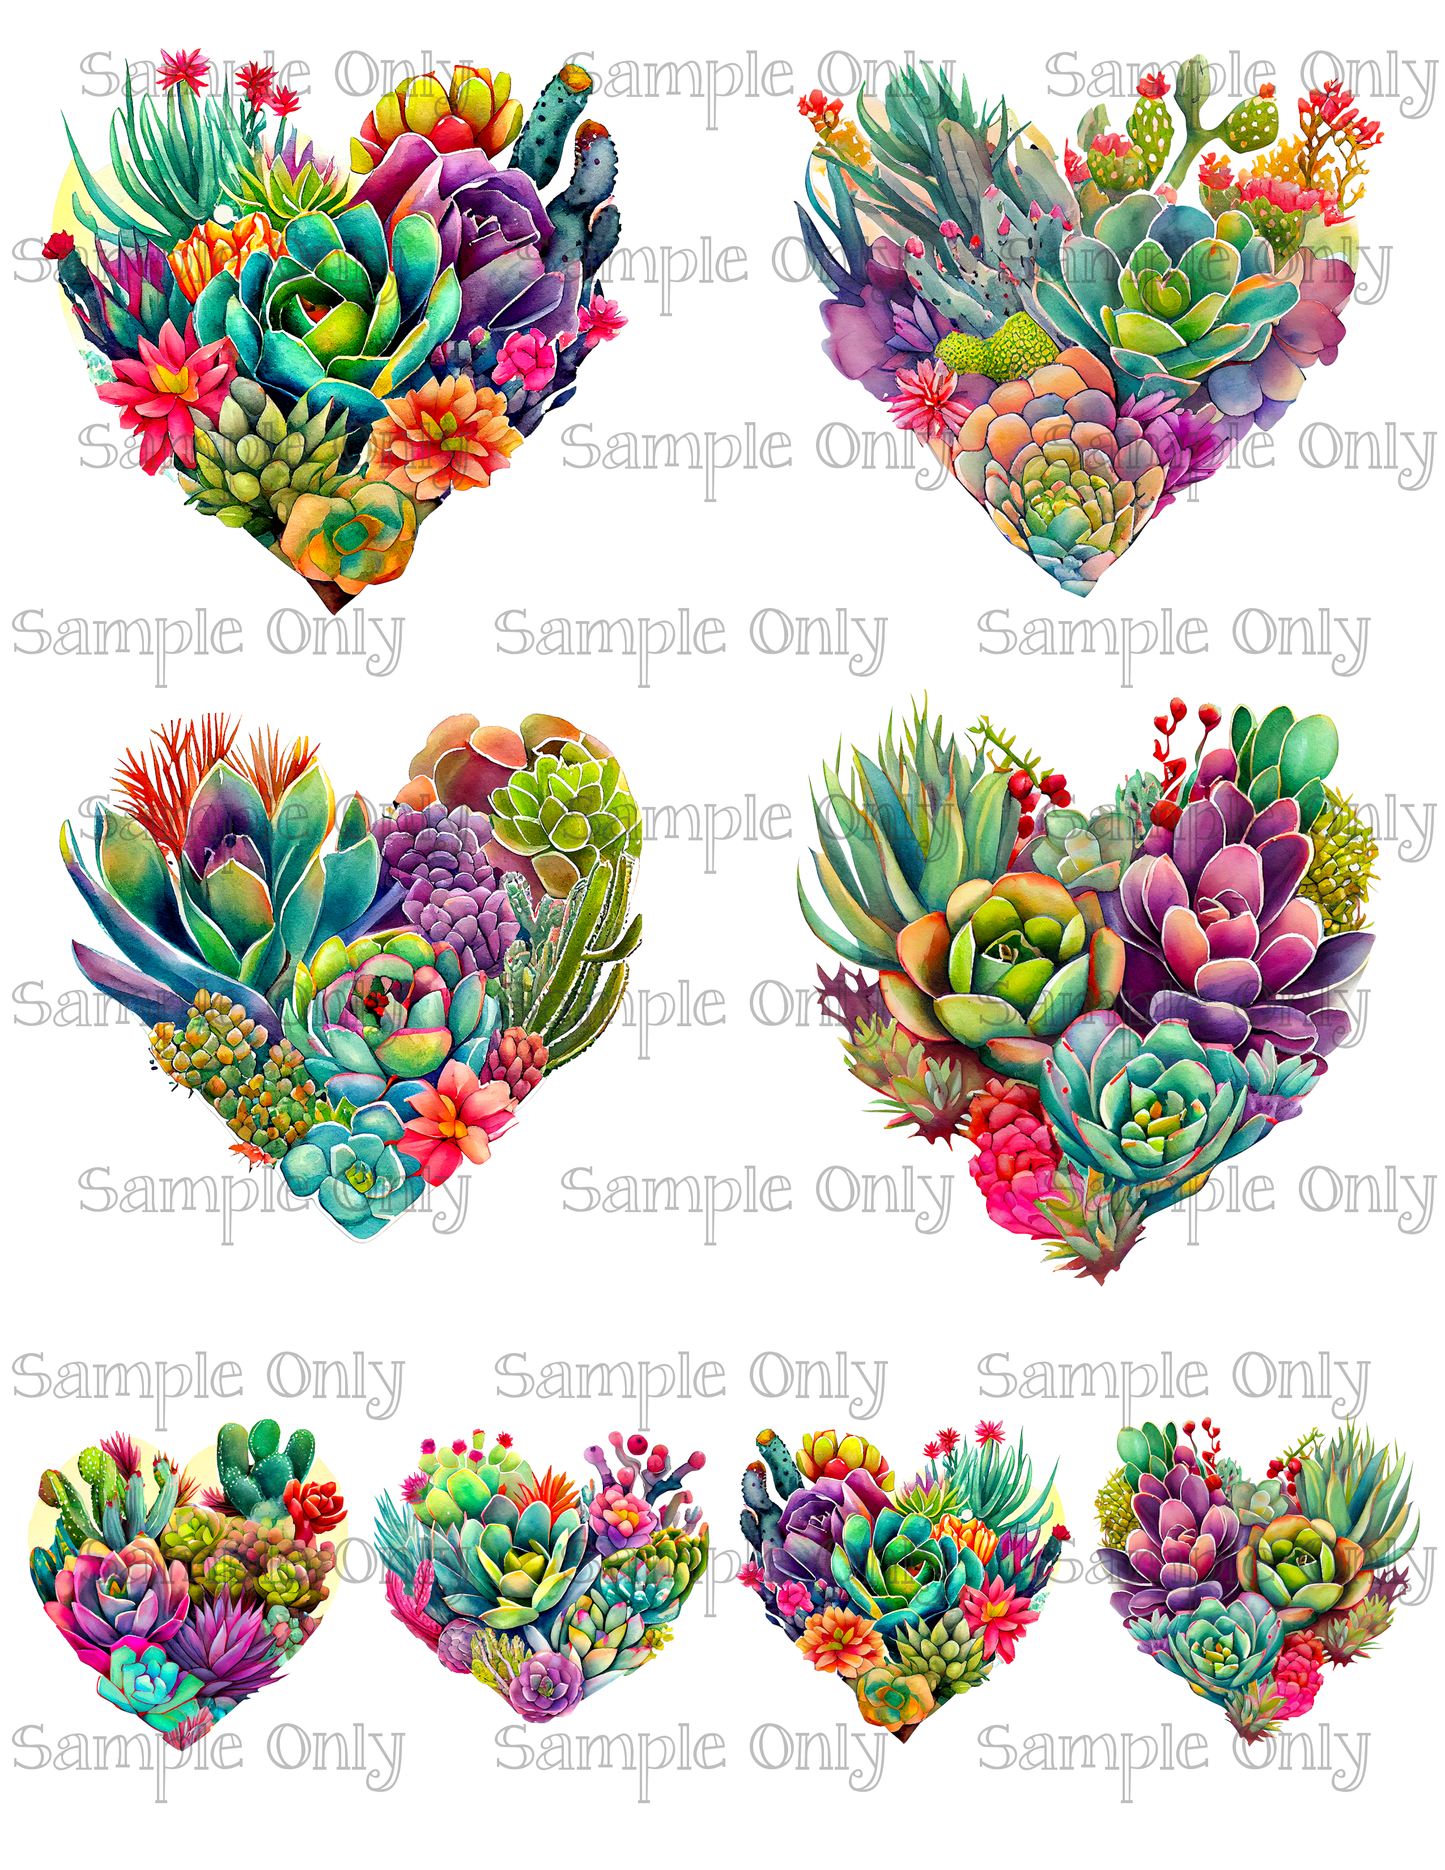 3.5 Inch Heart Shaped Succulents Image Sheet For Polymer Clay Transfer Decal DIGITAL FILE OR PRINTED